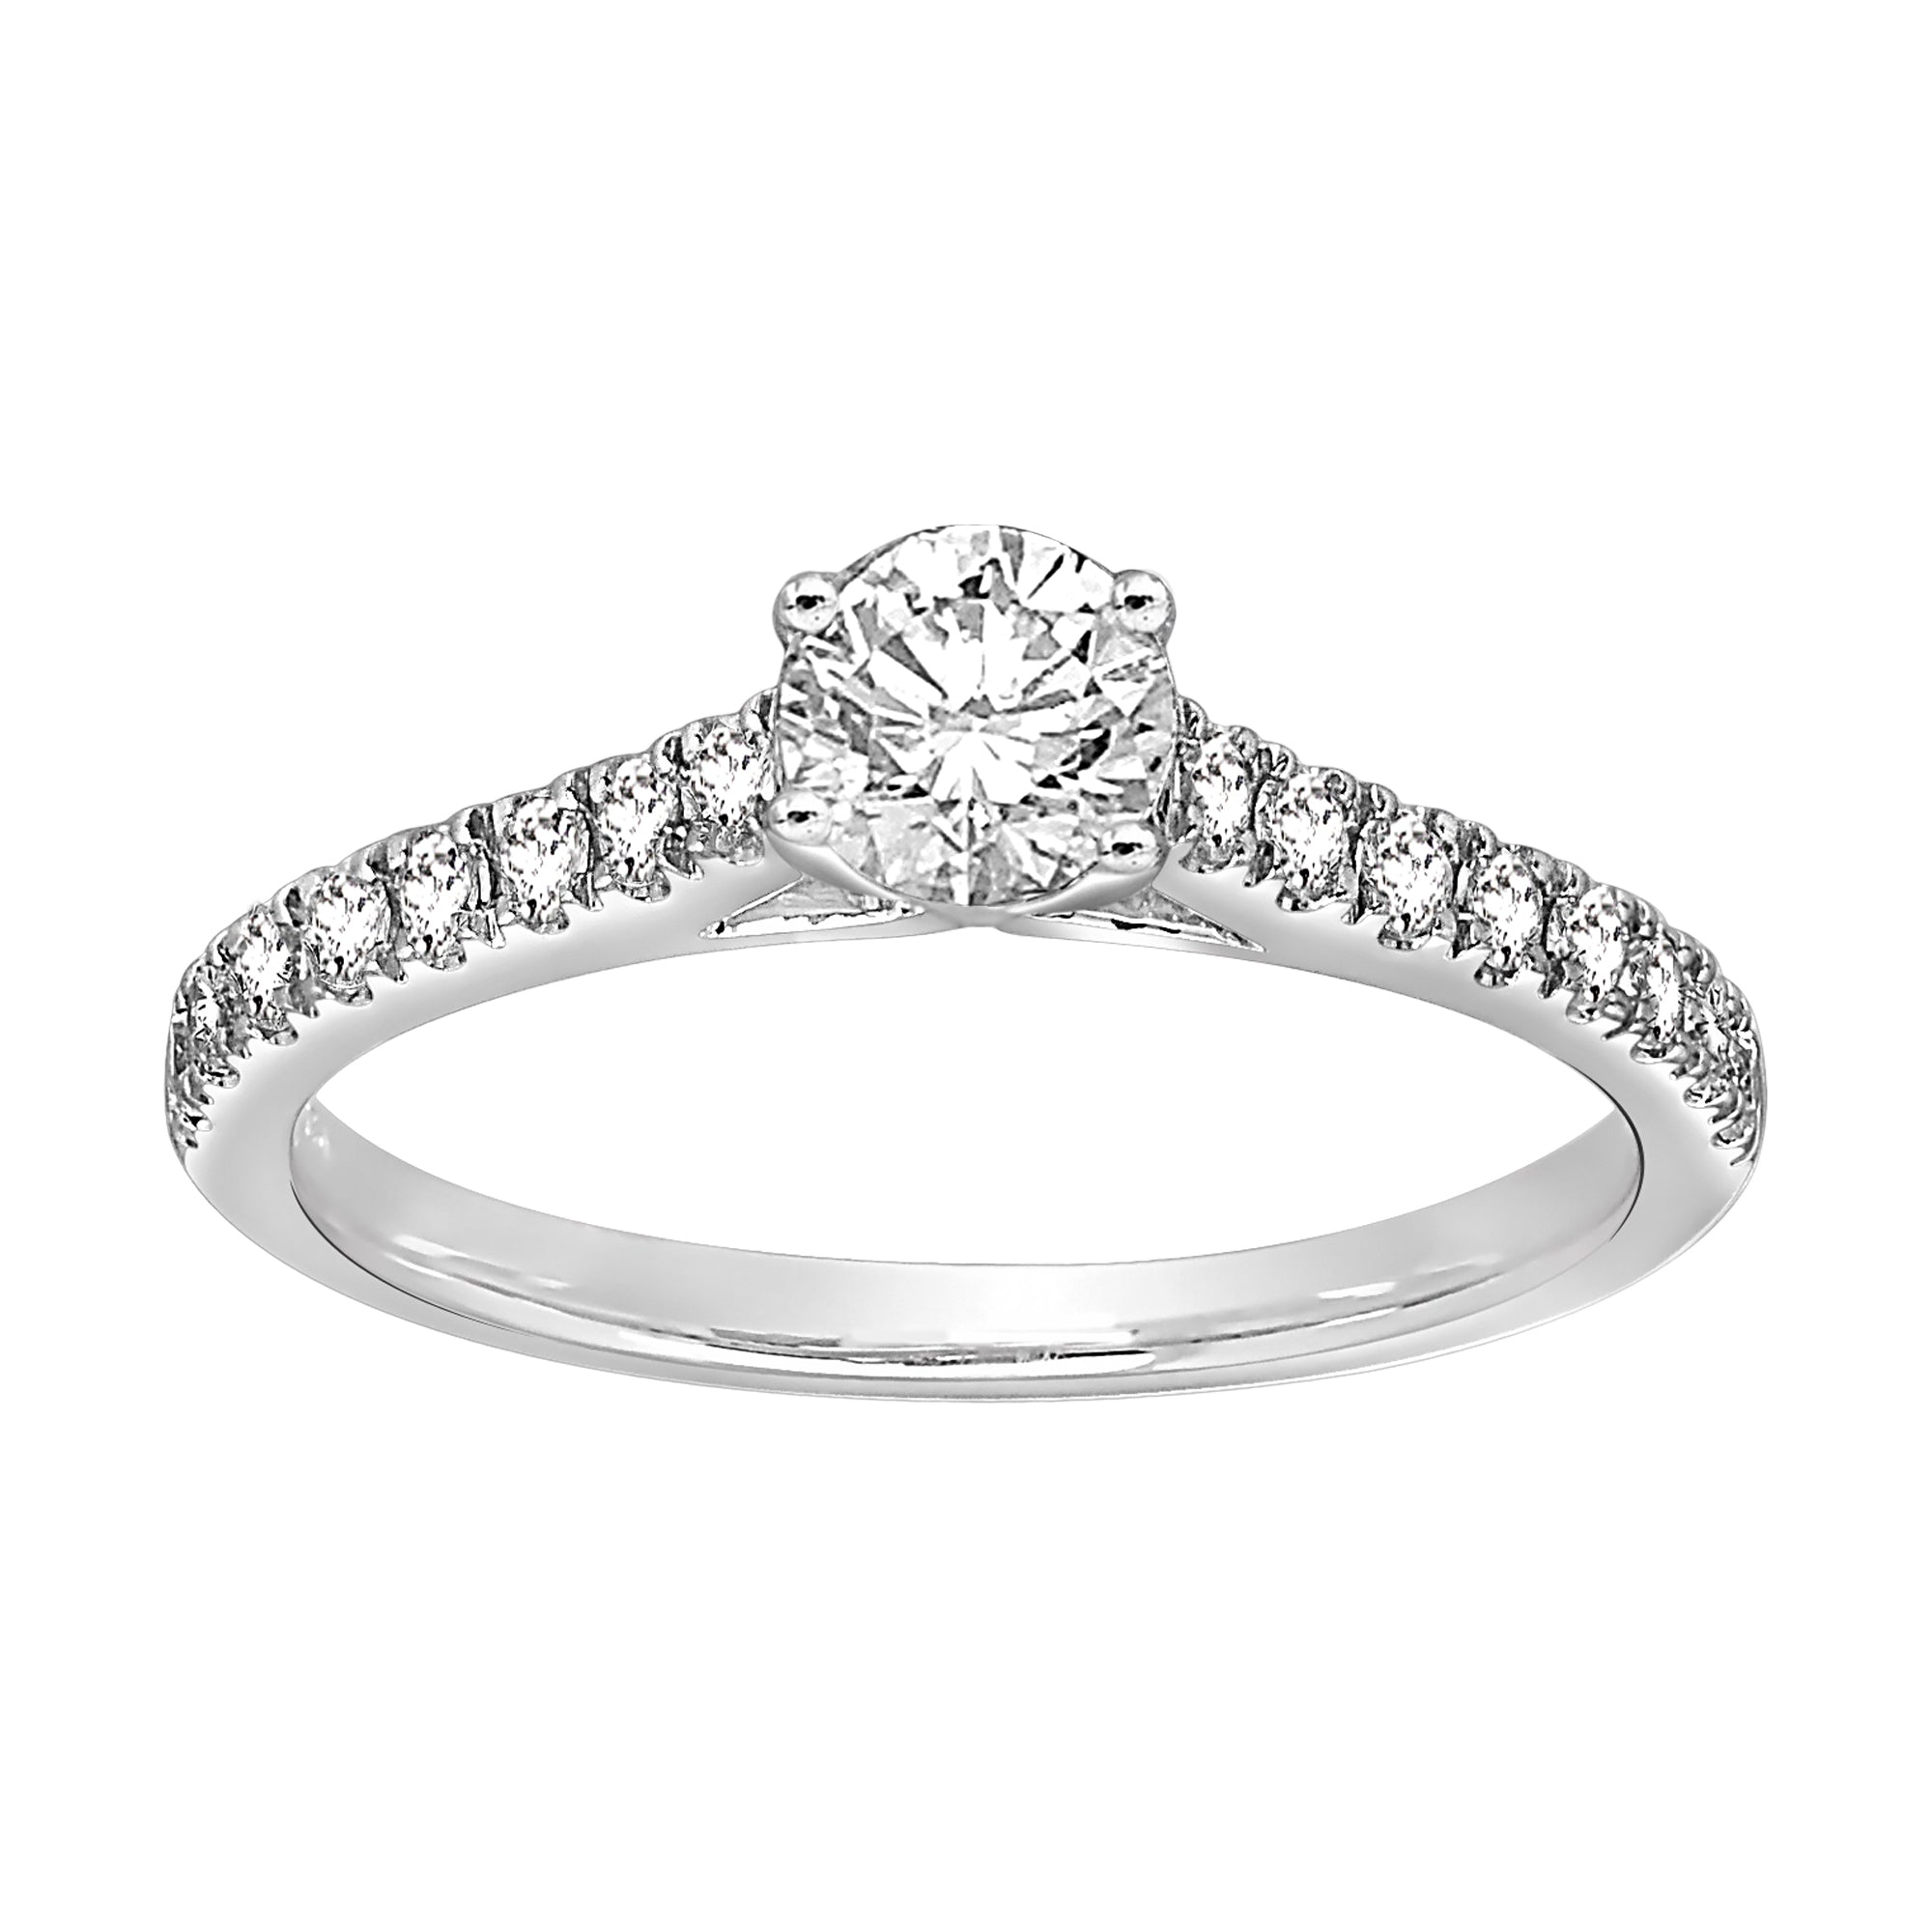 Sterling Silver Cubic Zirconia 0.75ct Ring - AK1031 - Hallmark Jewellers Formby & The Jewellers Bench Widnes